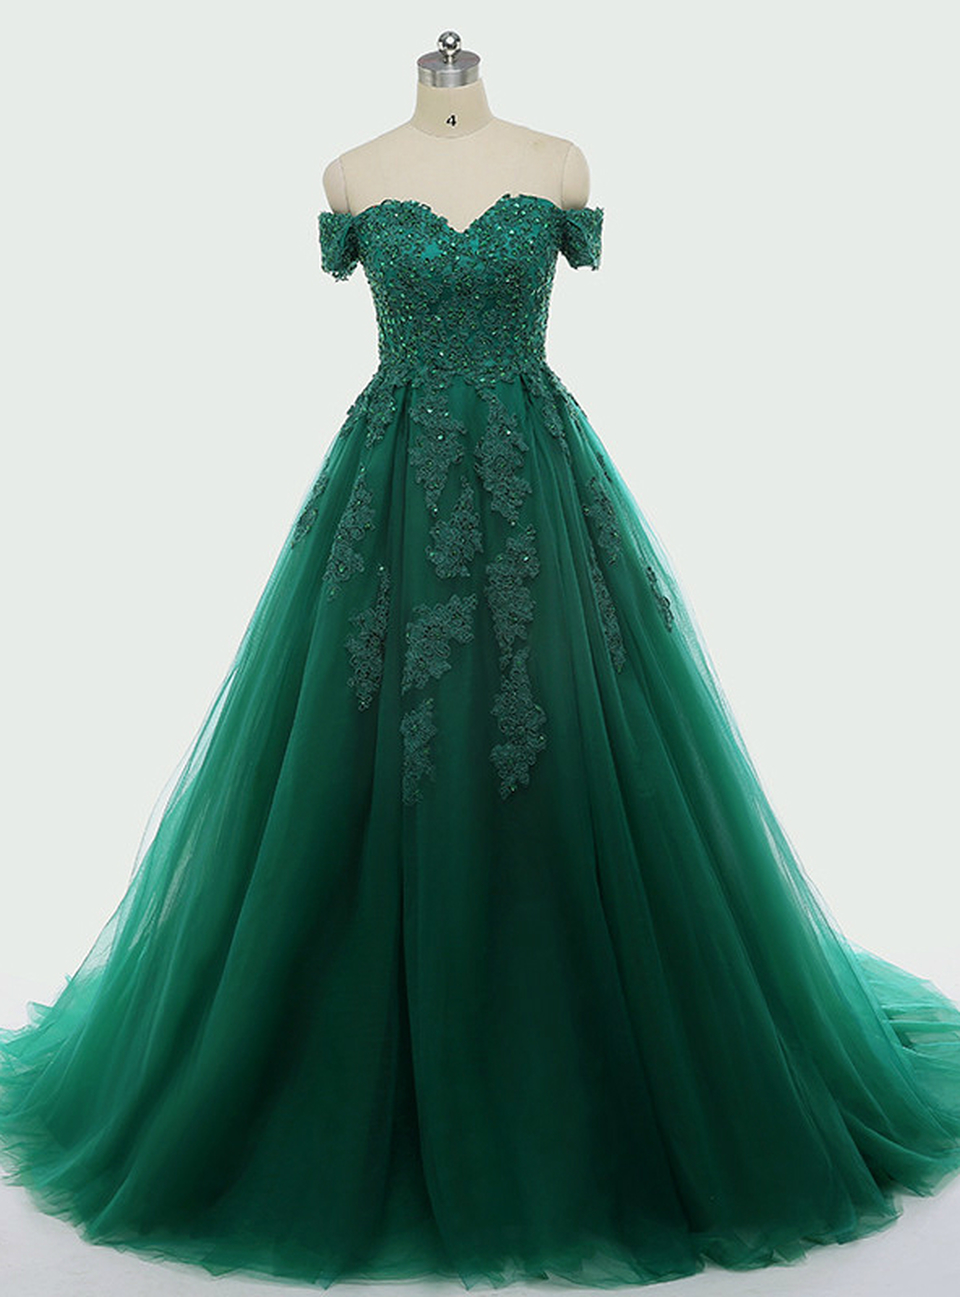 Dark Green Lace Appliques Short Sleeve Ball Gown For 15 Quinceanera Dresses,p3924